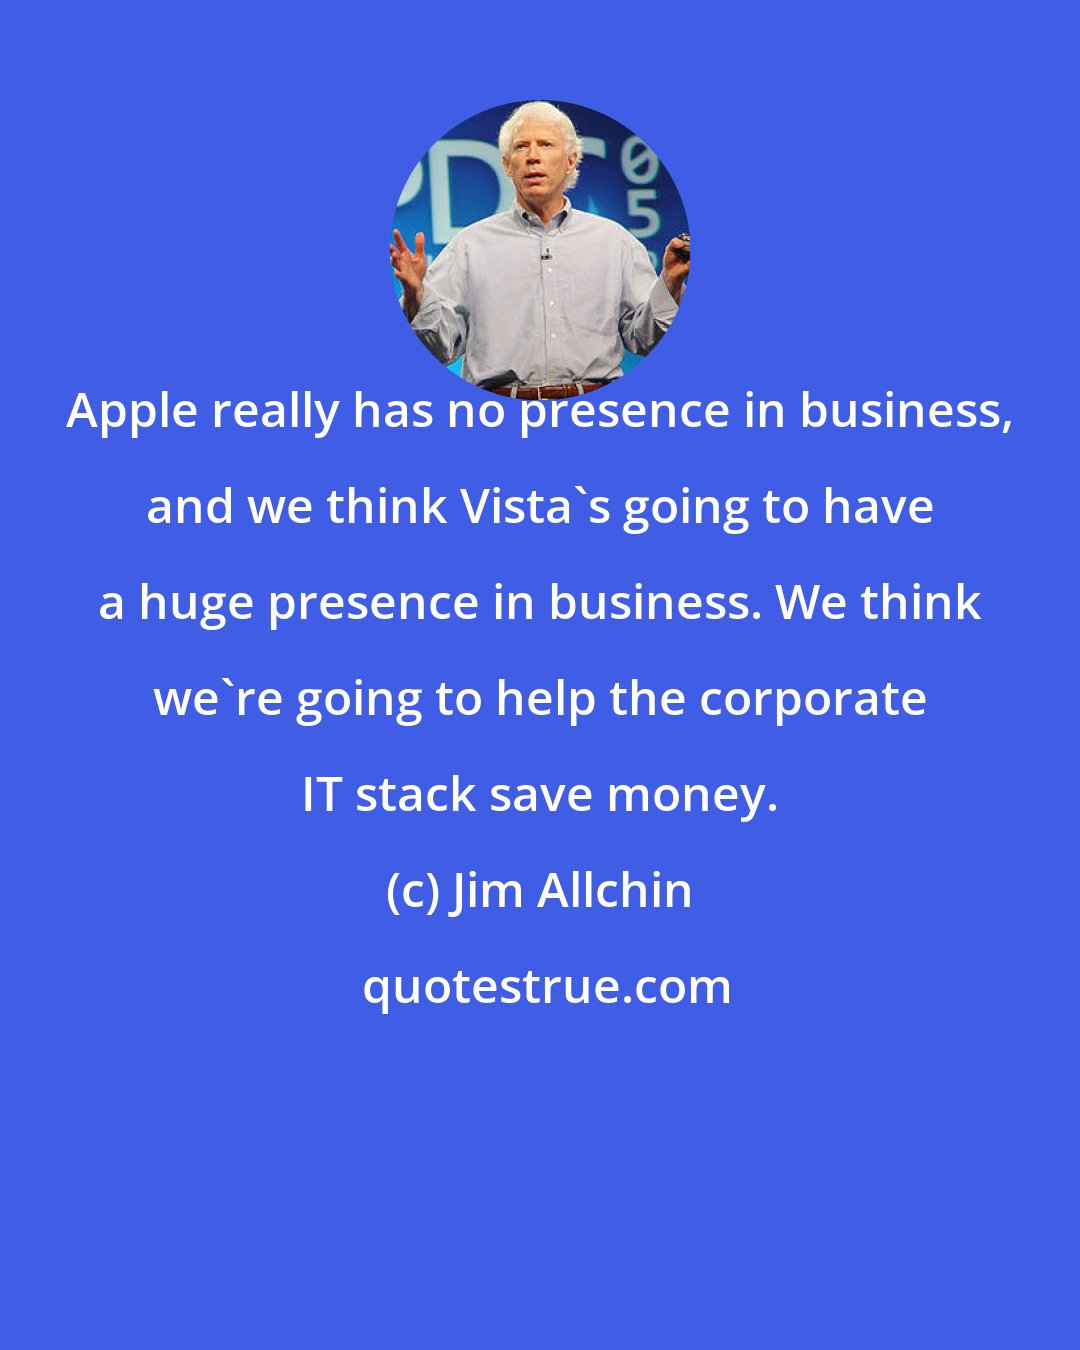 Jim Allchin: Apple really has no presence in business, and we think Vista's going to have a huge presence in business. We think we're going to help the corporate IT stack save money.